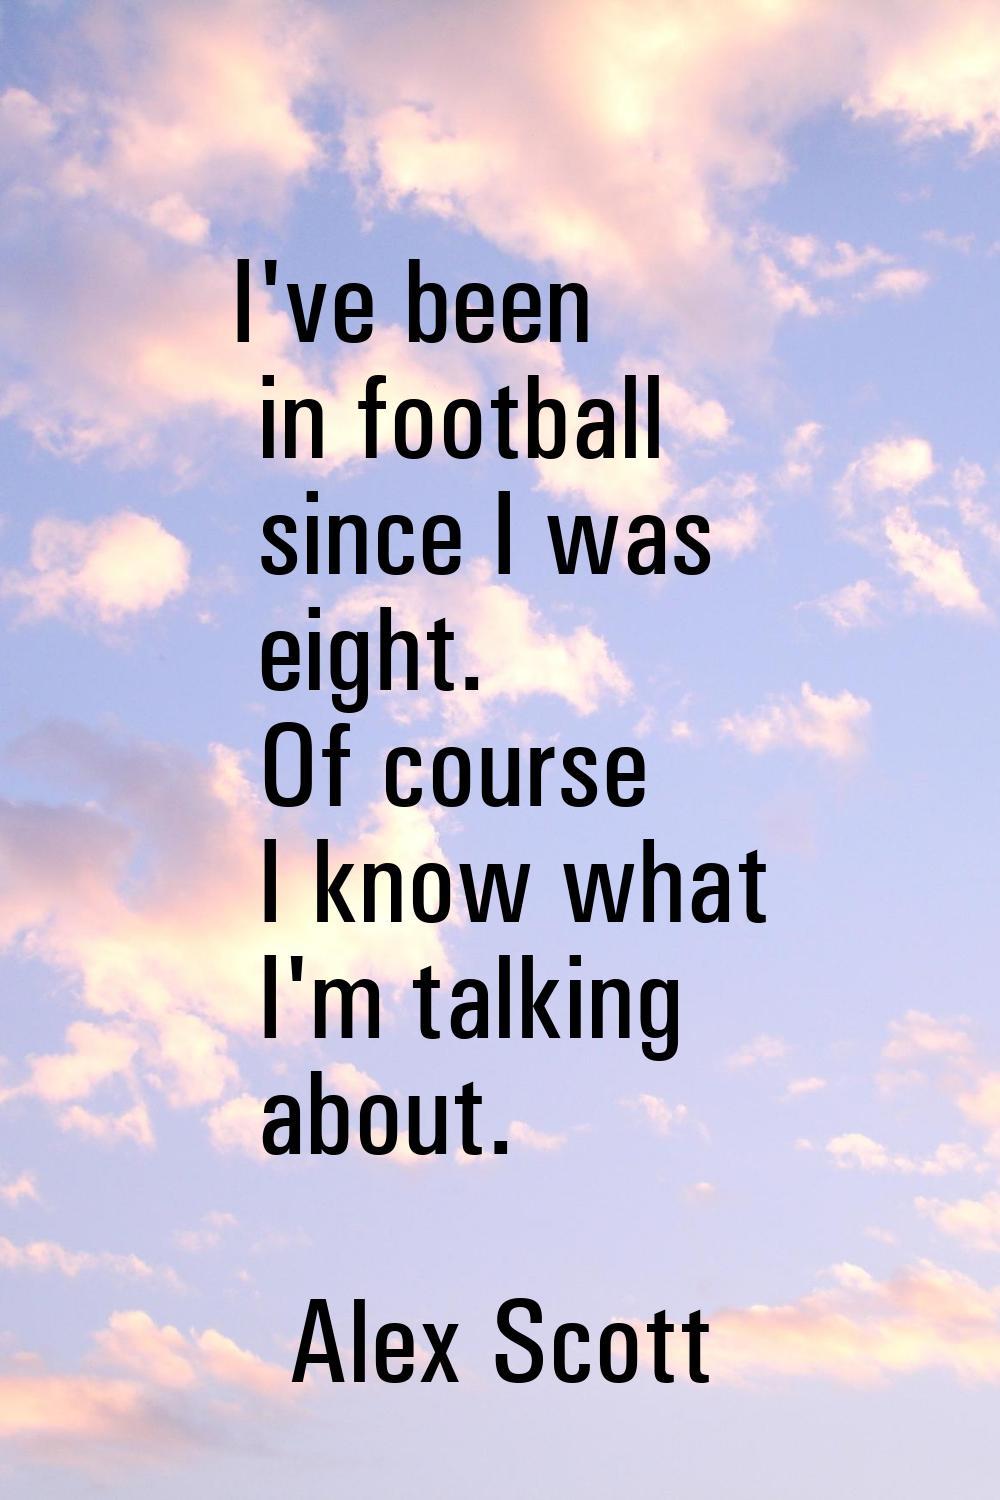 I've been in football since I was eight. Of course I know what I'm talking about.